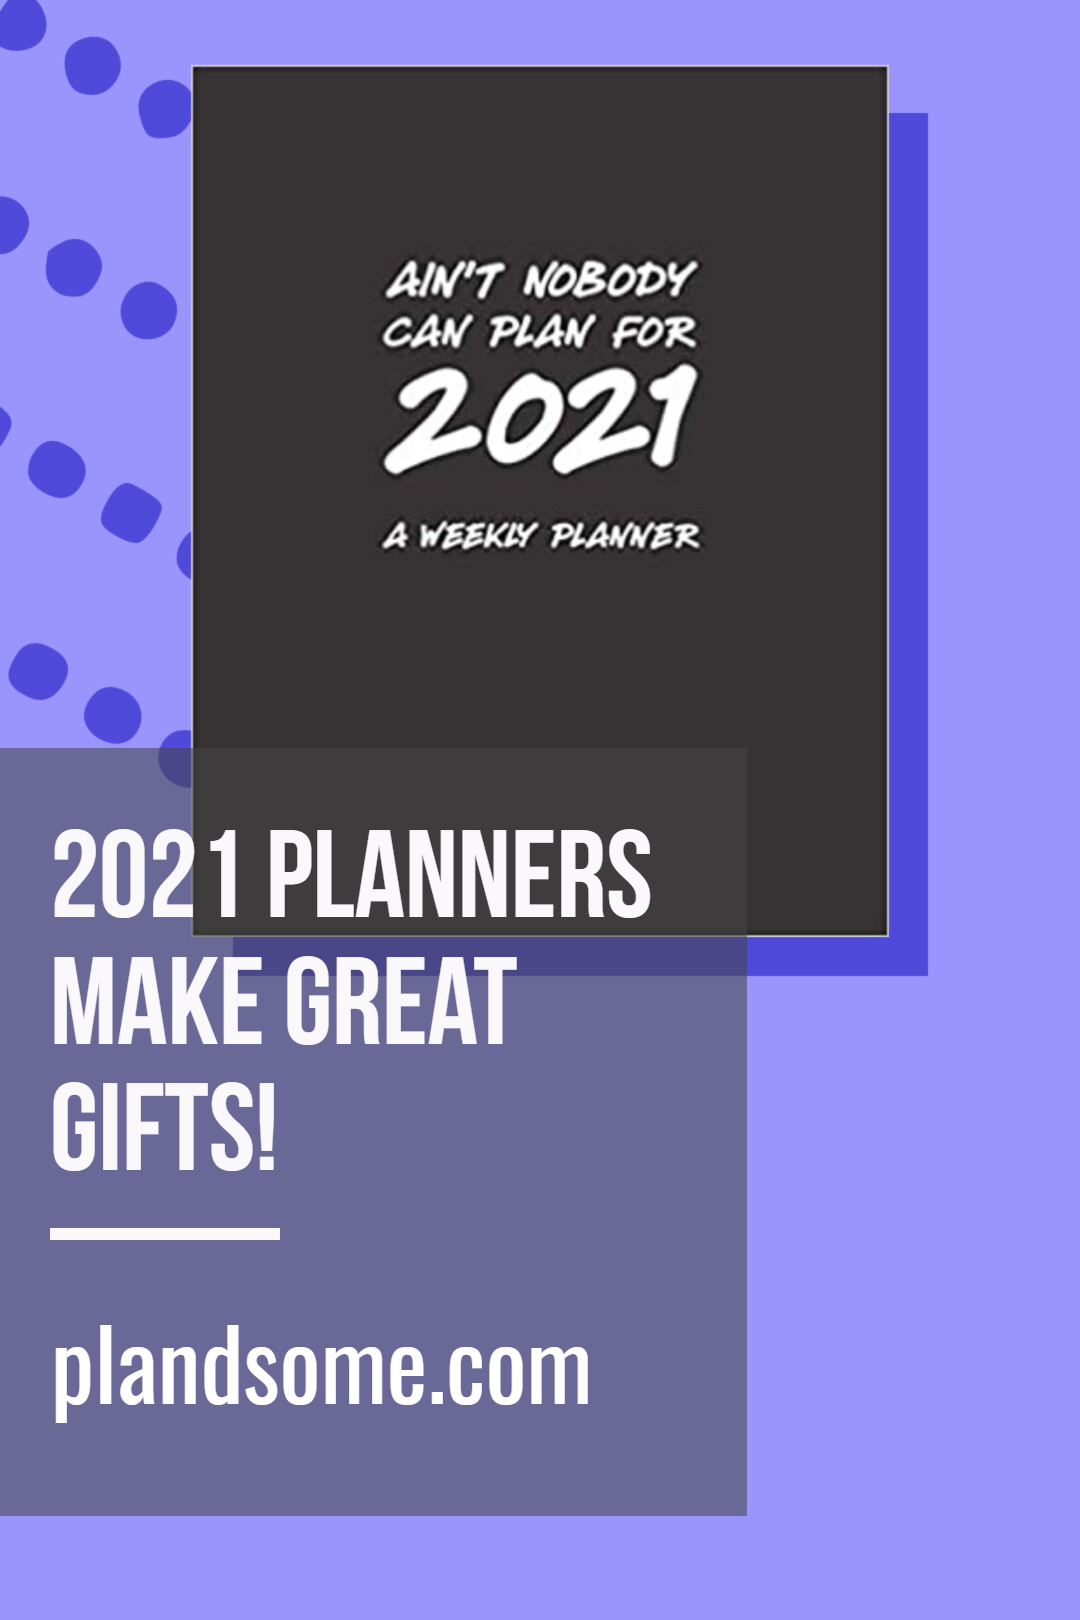 Planners make great gifts!